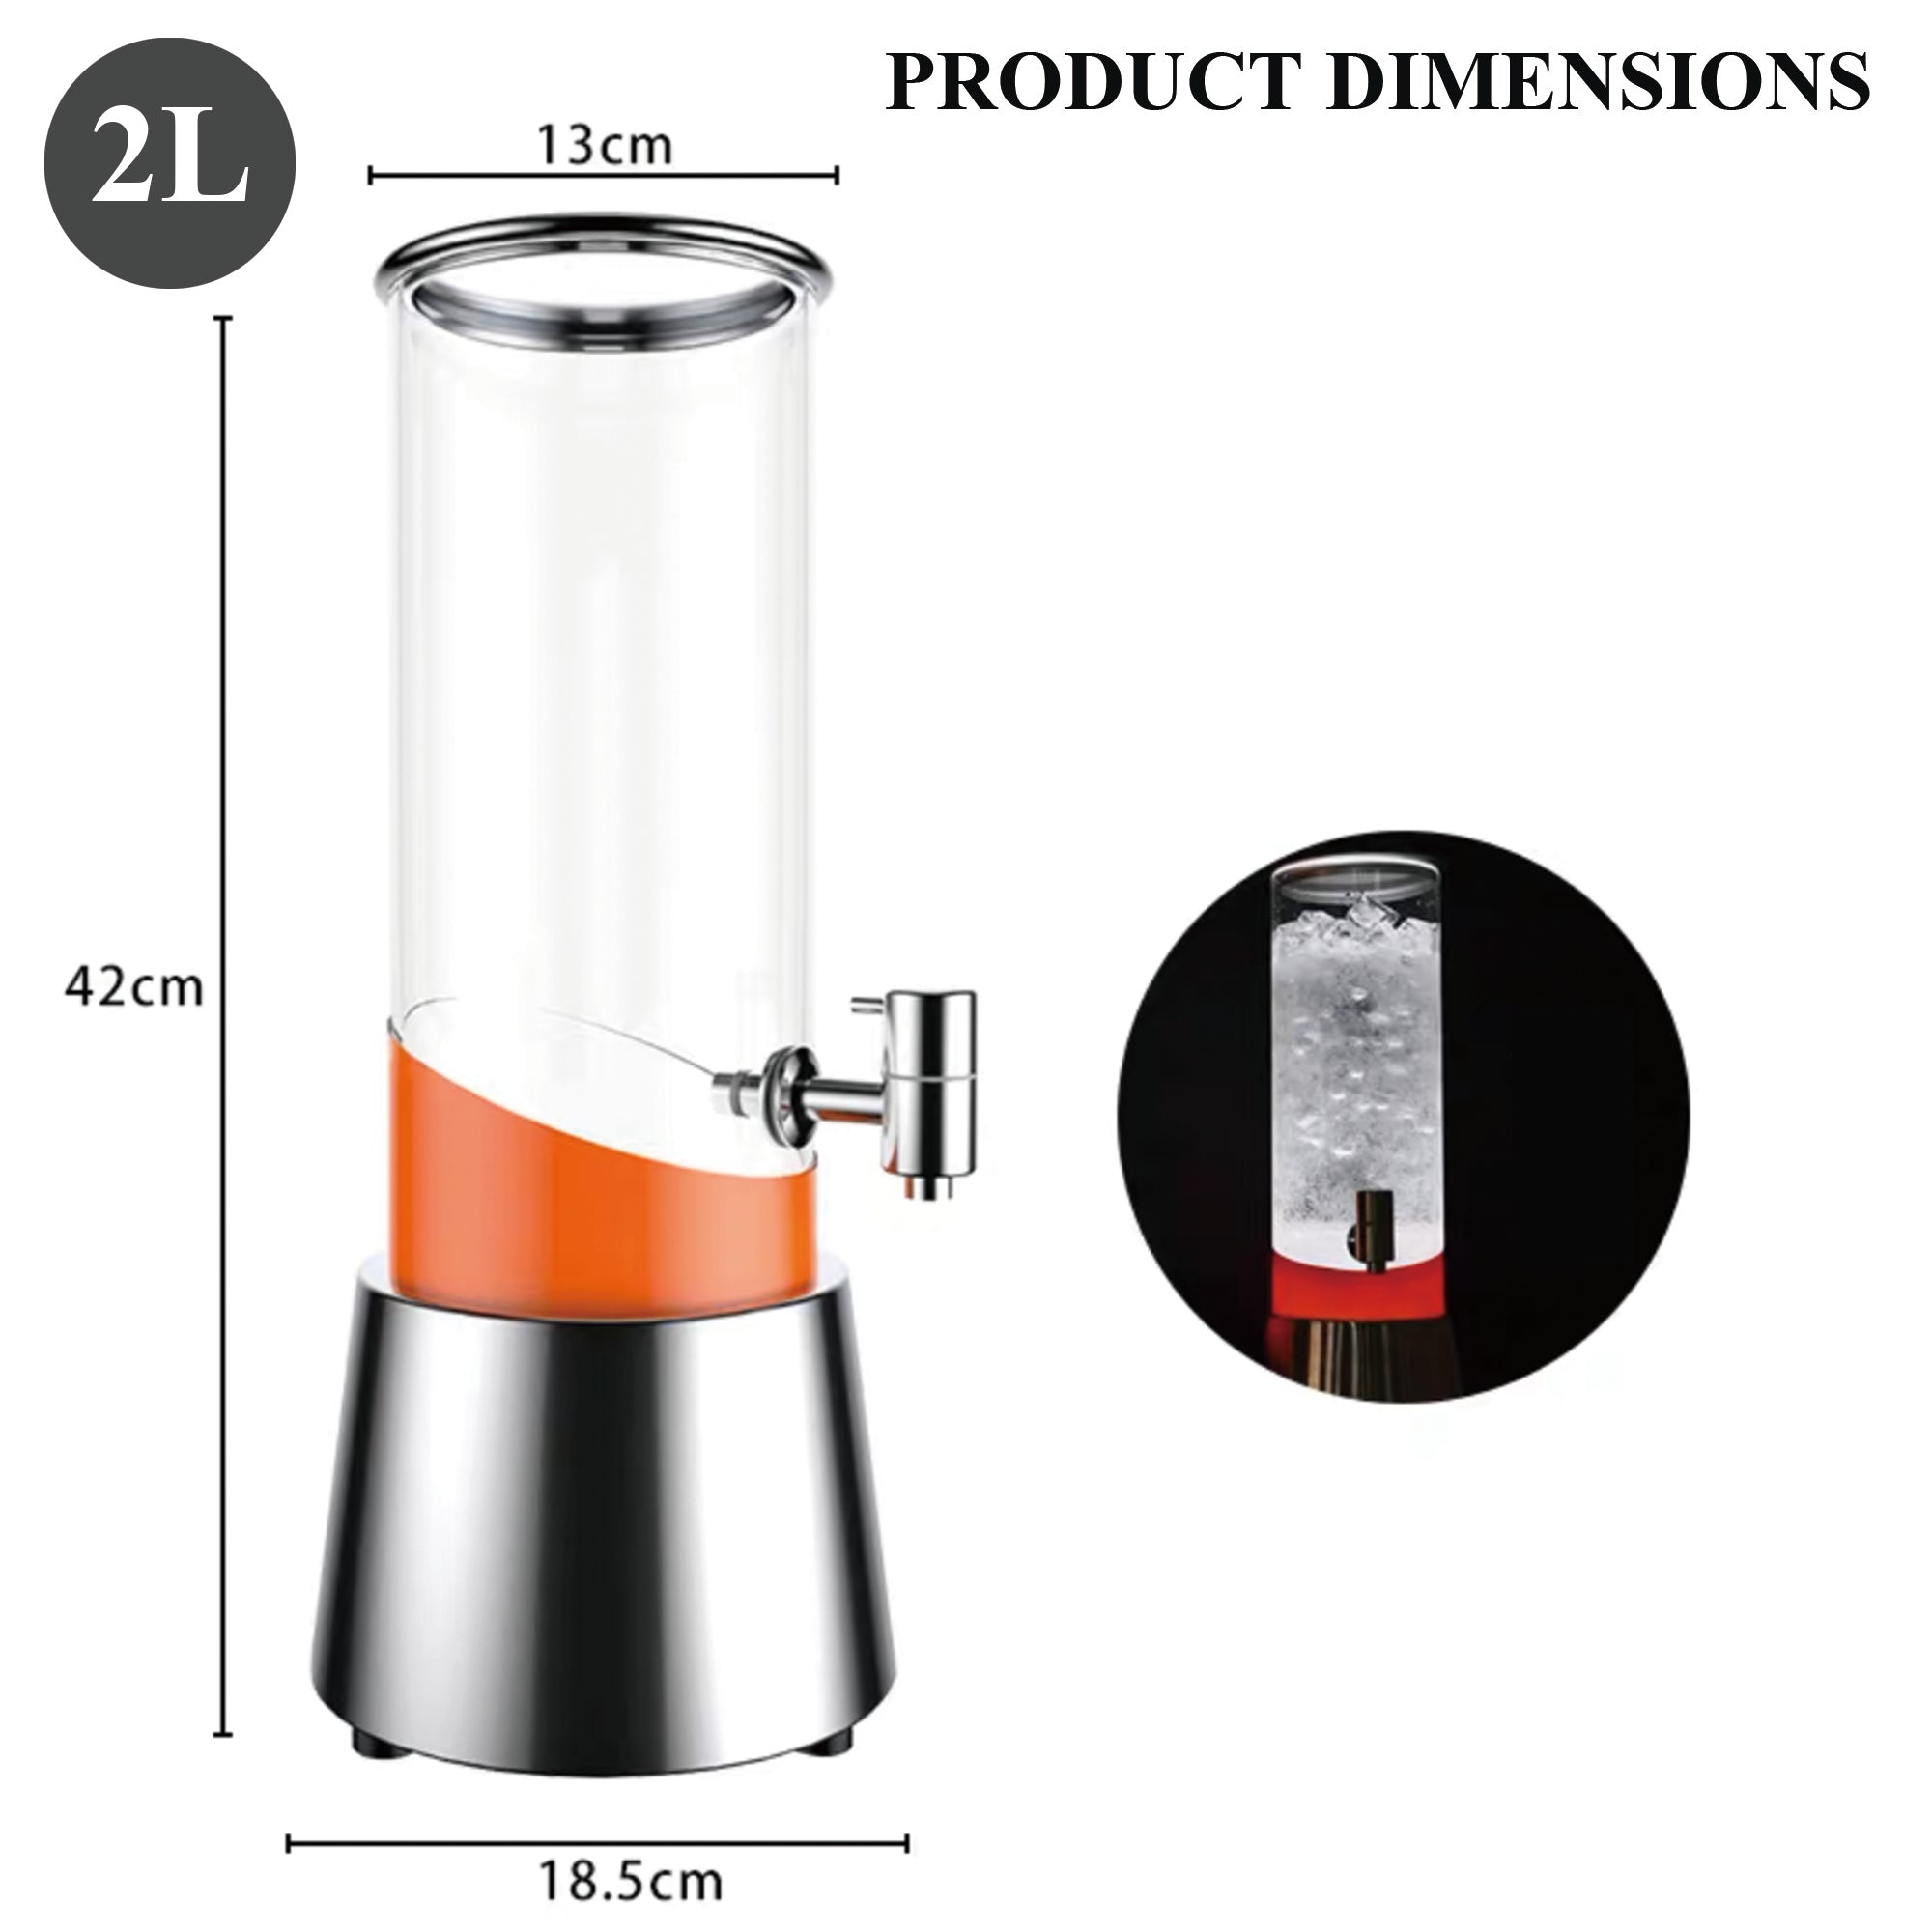 Drink Tower Dispenser with Ice Tube and LED Light - 3.2 Qt./3 L, Margarita  Mimosa Tower Drink Dispenser with Tap, Freeze Tube Keep Beverages Cold